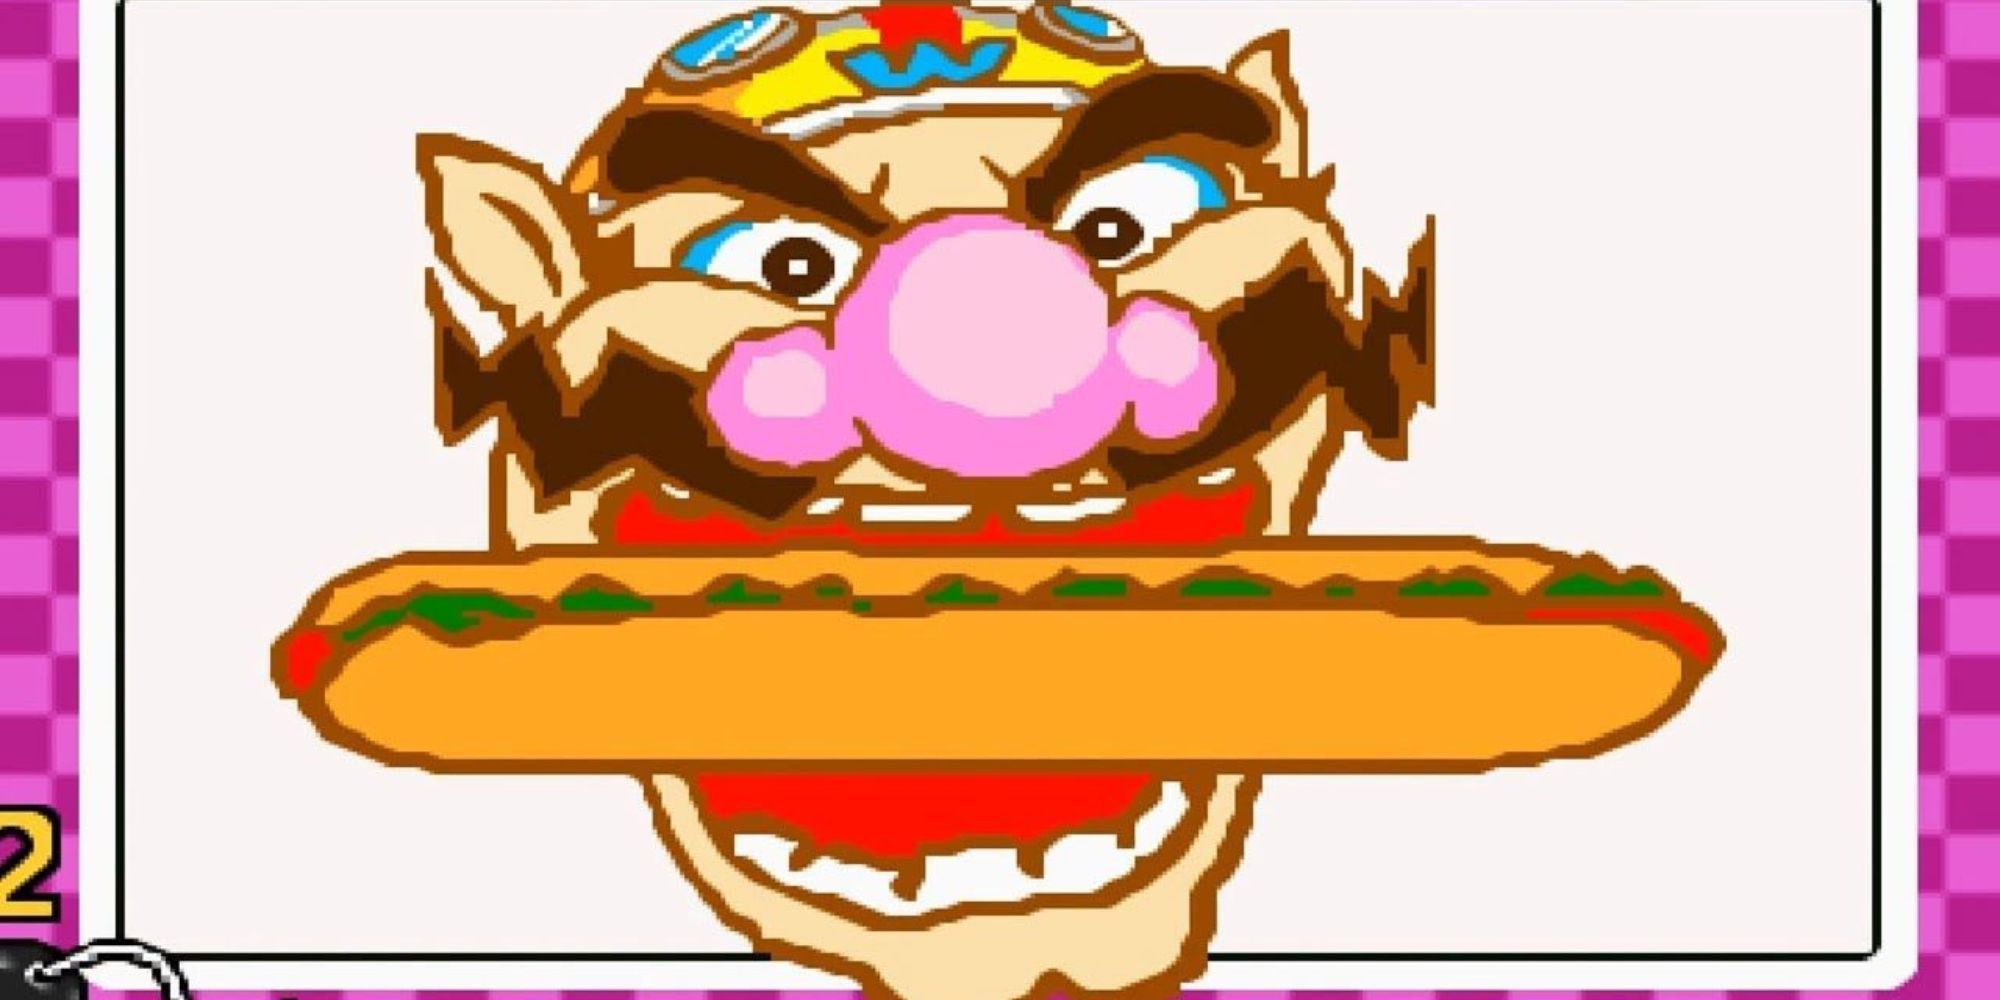 Wario eats a giant hot dog in a microgame